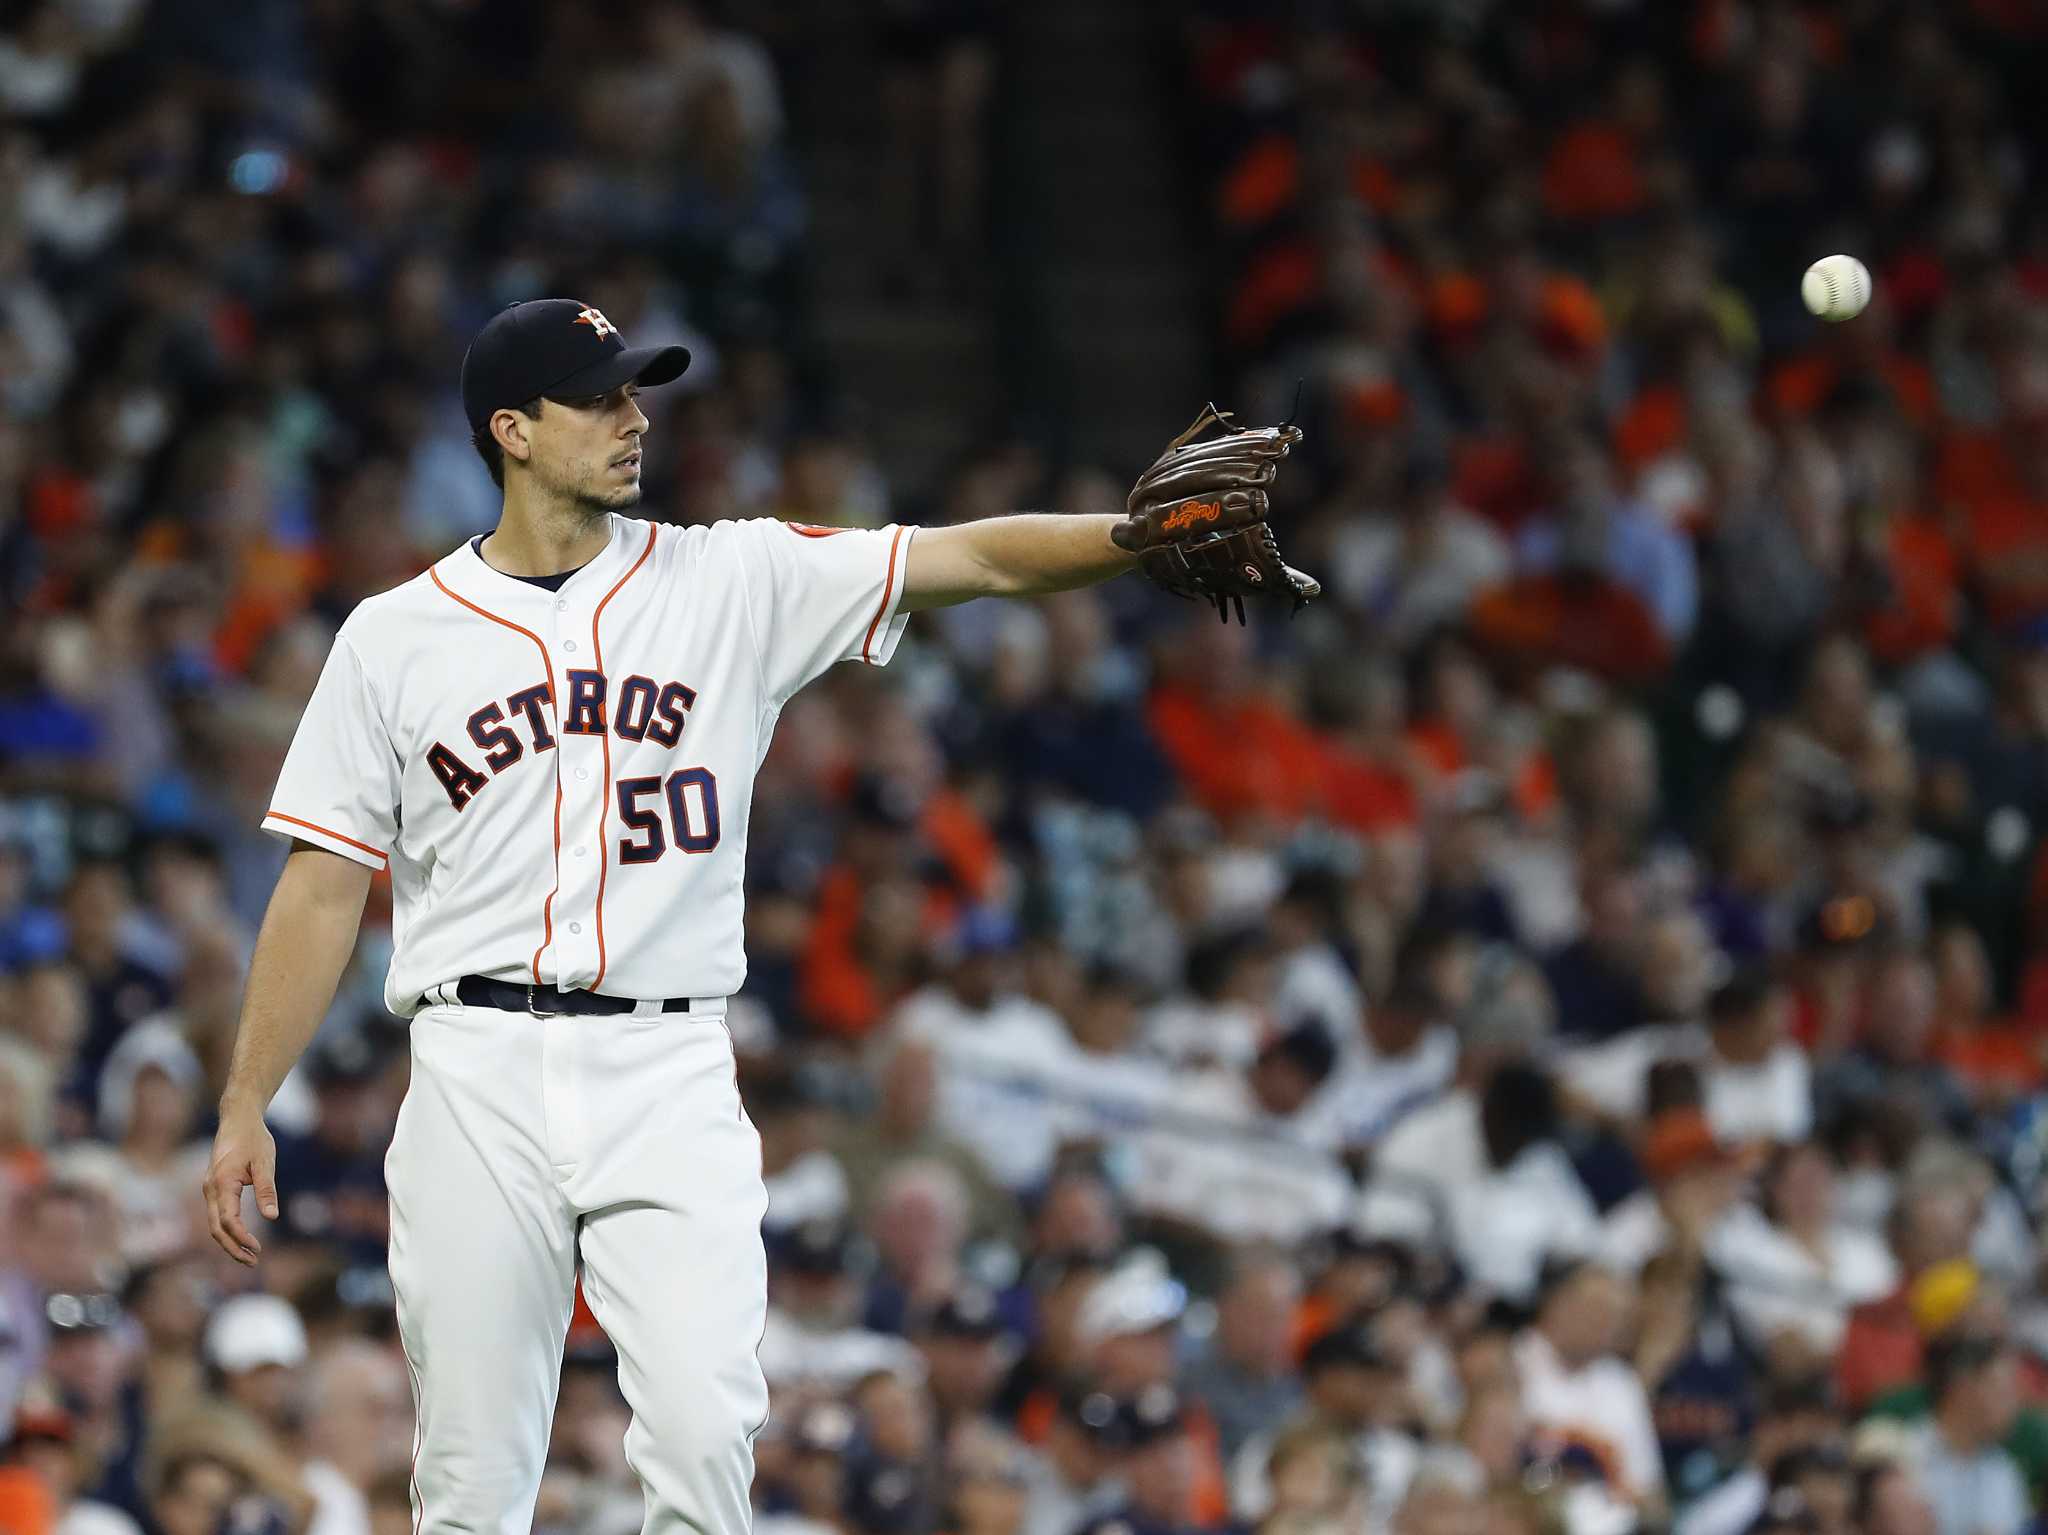 Will Harris joins Jose Altuve as Astros on All-Star team